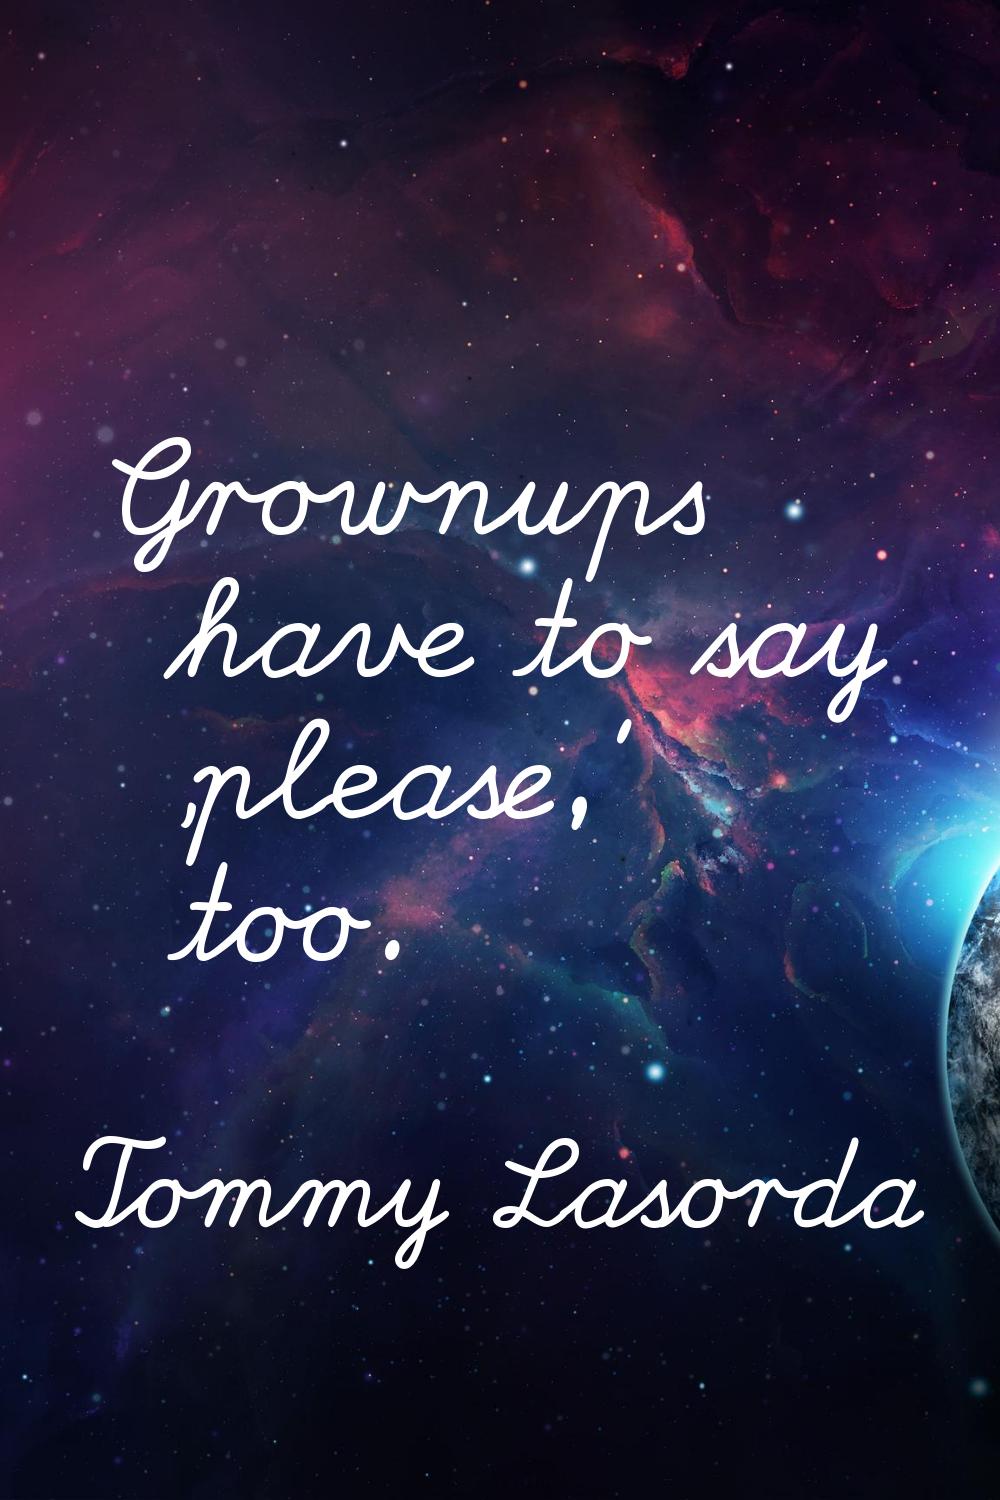 Grownups have to say 'please,' too.